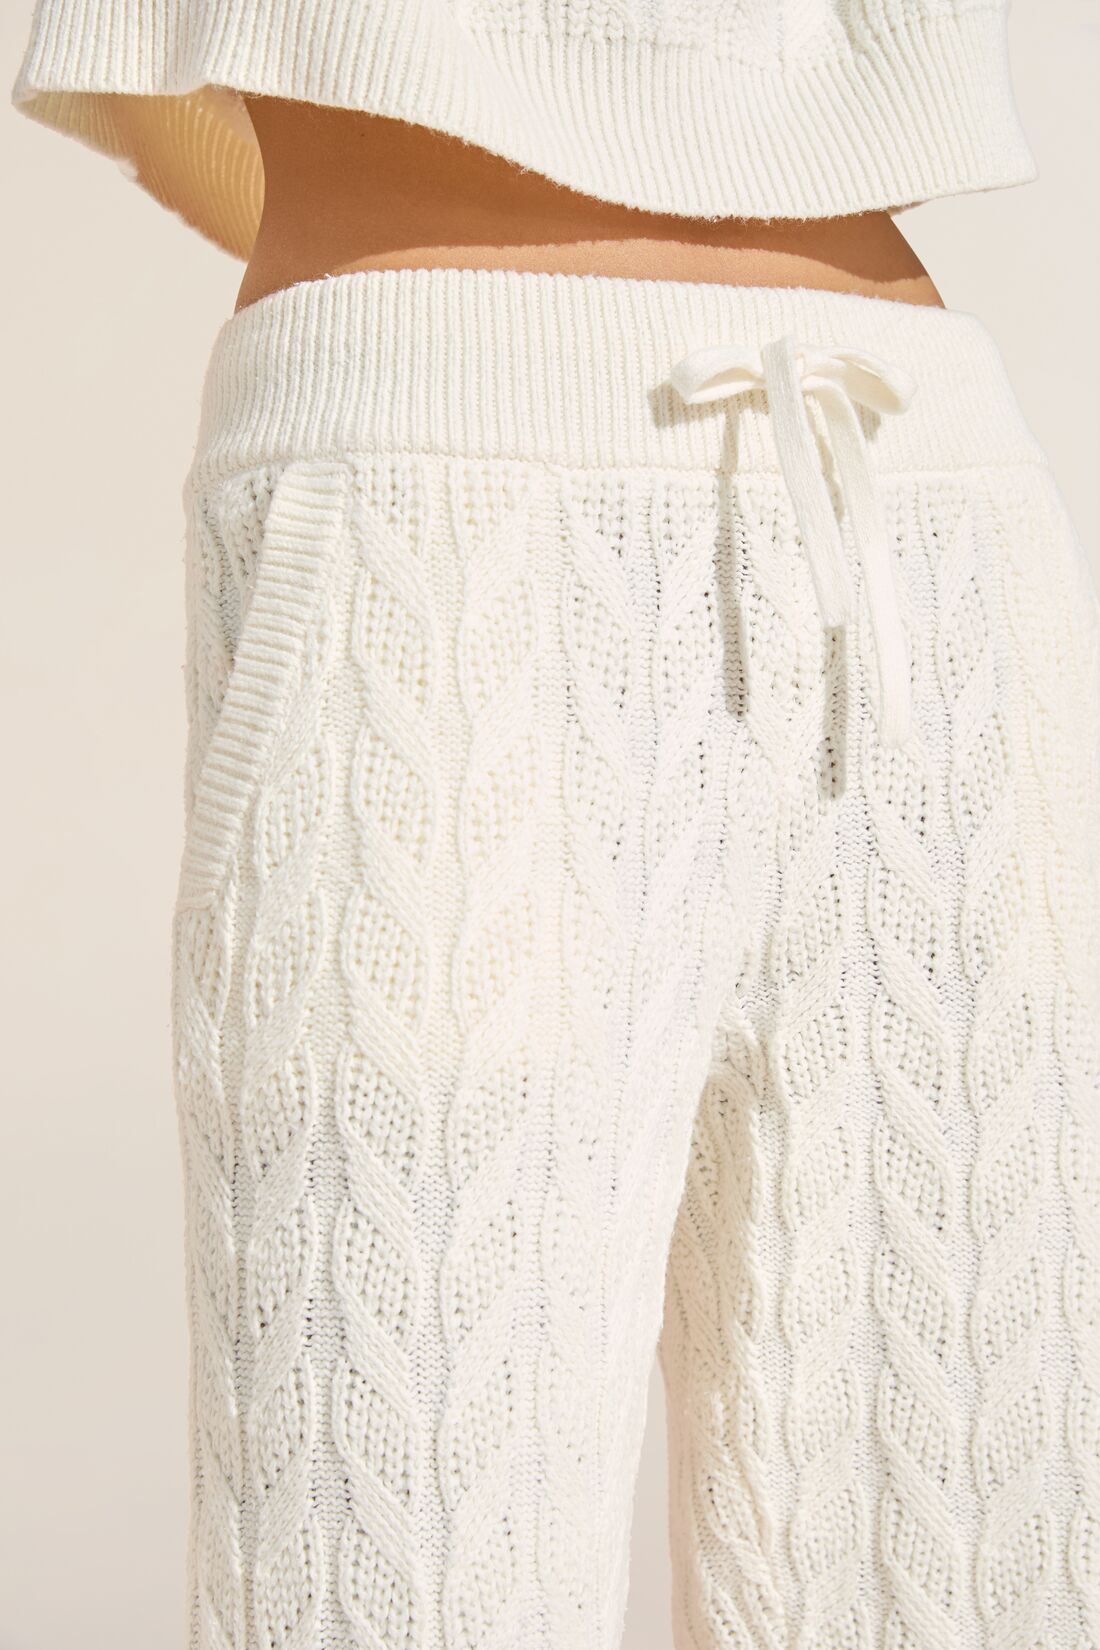 Cable Knit Recycled Sweater Straight Leg Pant